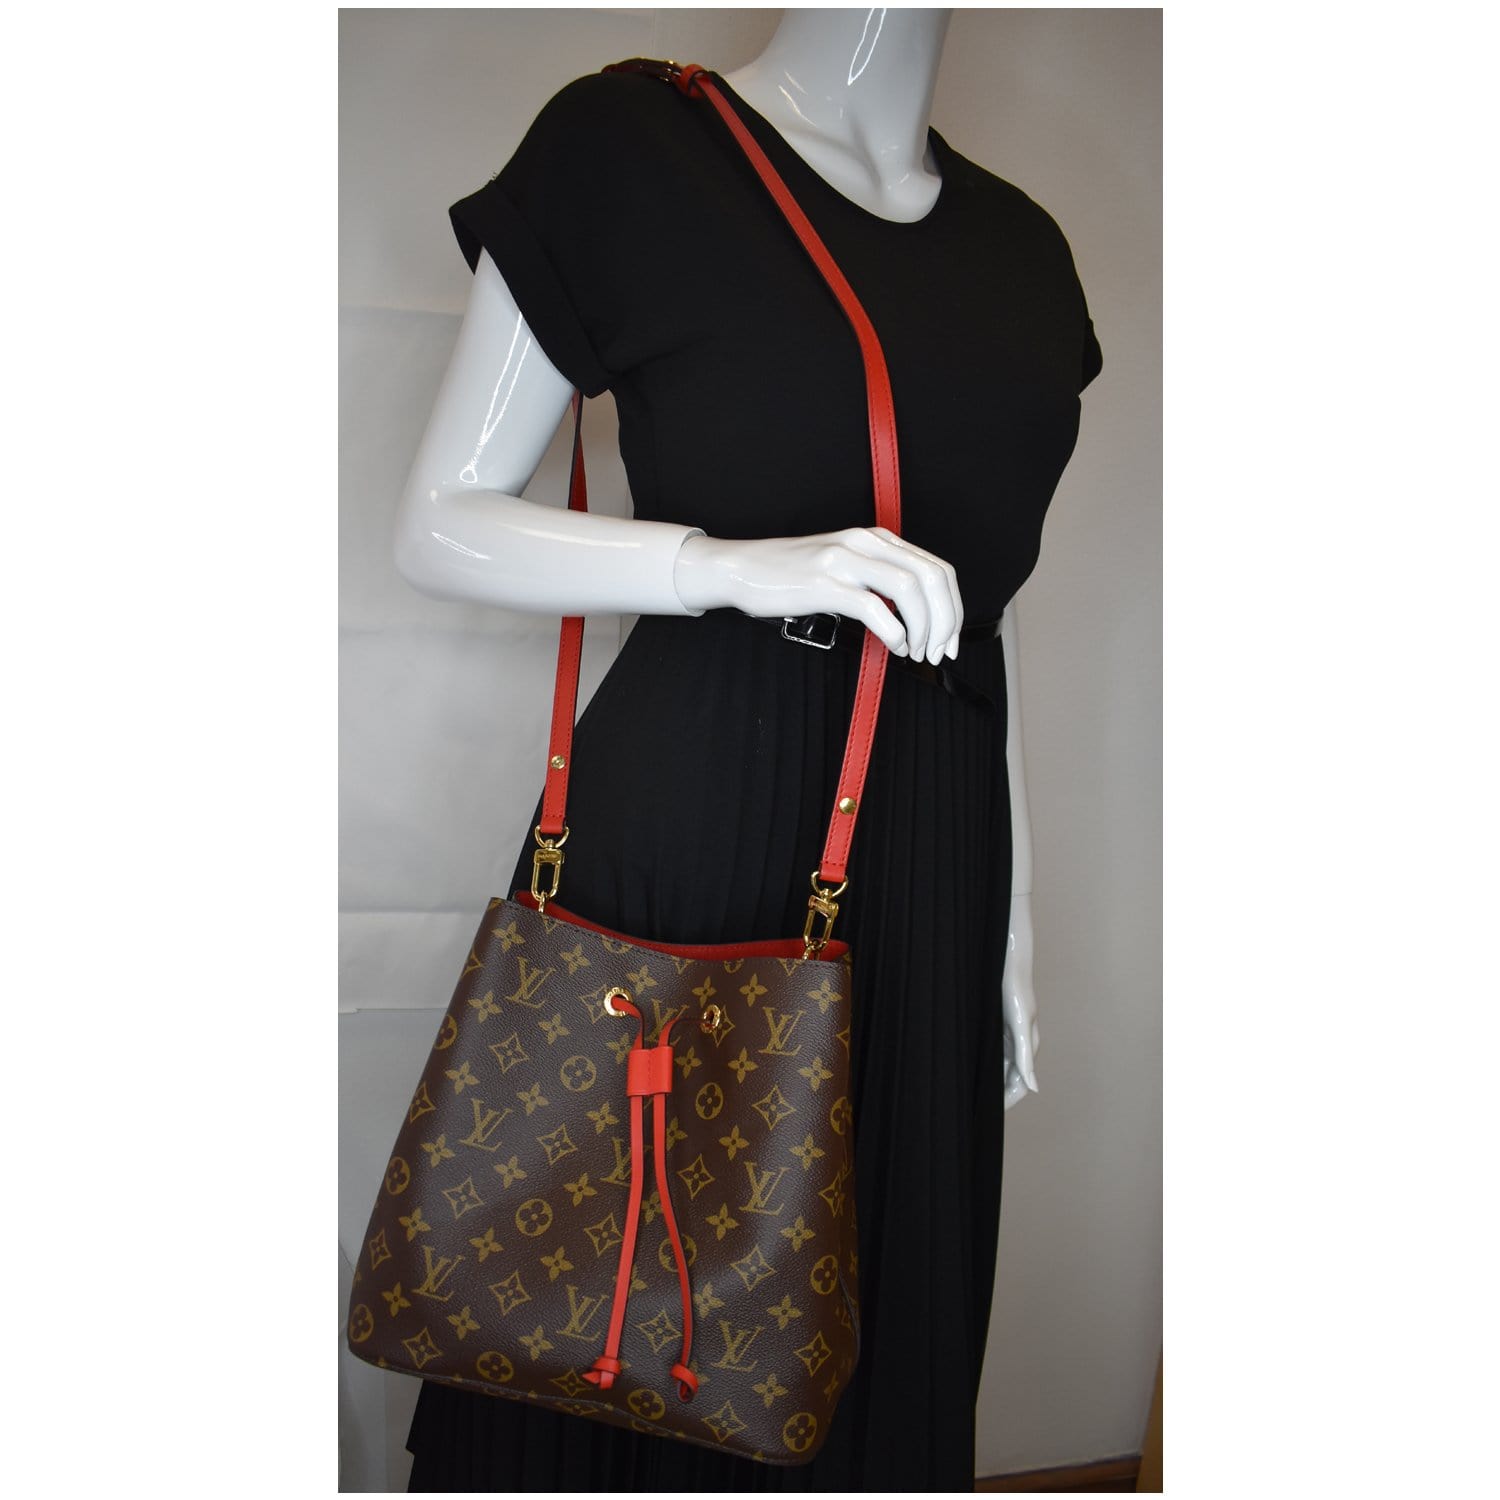 Louis Vuitton womens Damiere NoeNoe bucket bag with red Straps.